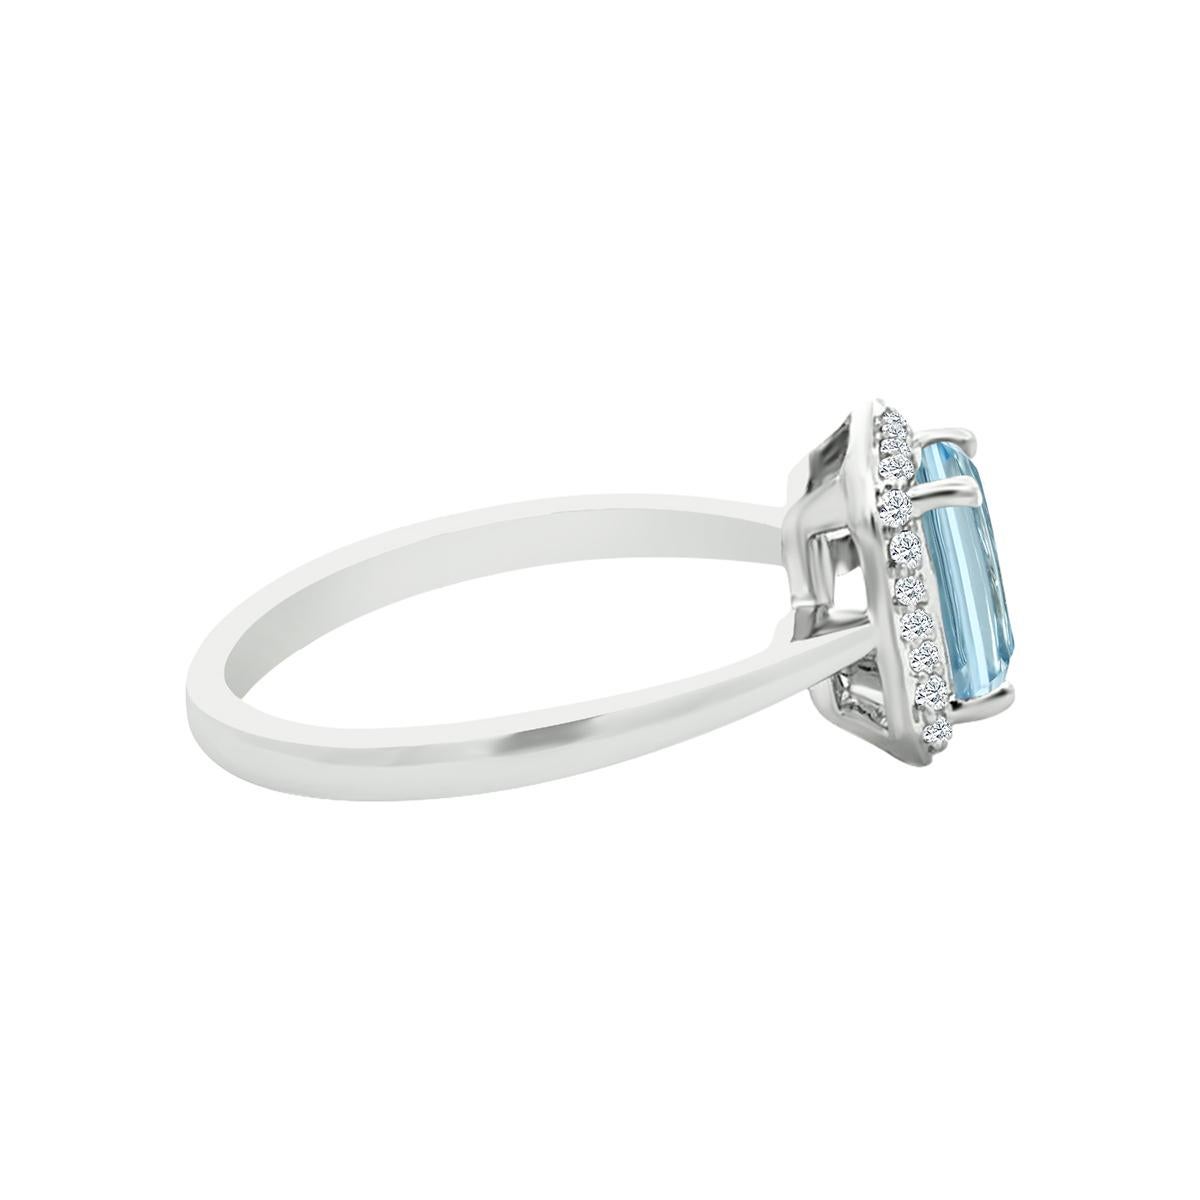 Modern 14K White Gold 0.98cts Aquamarine And Diamond Ring. Style# TS1273AQR 22032/13 For Sale